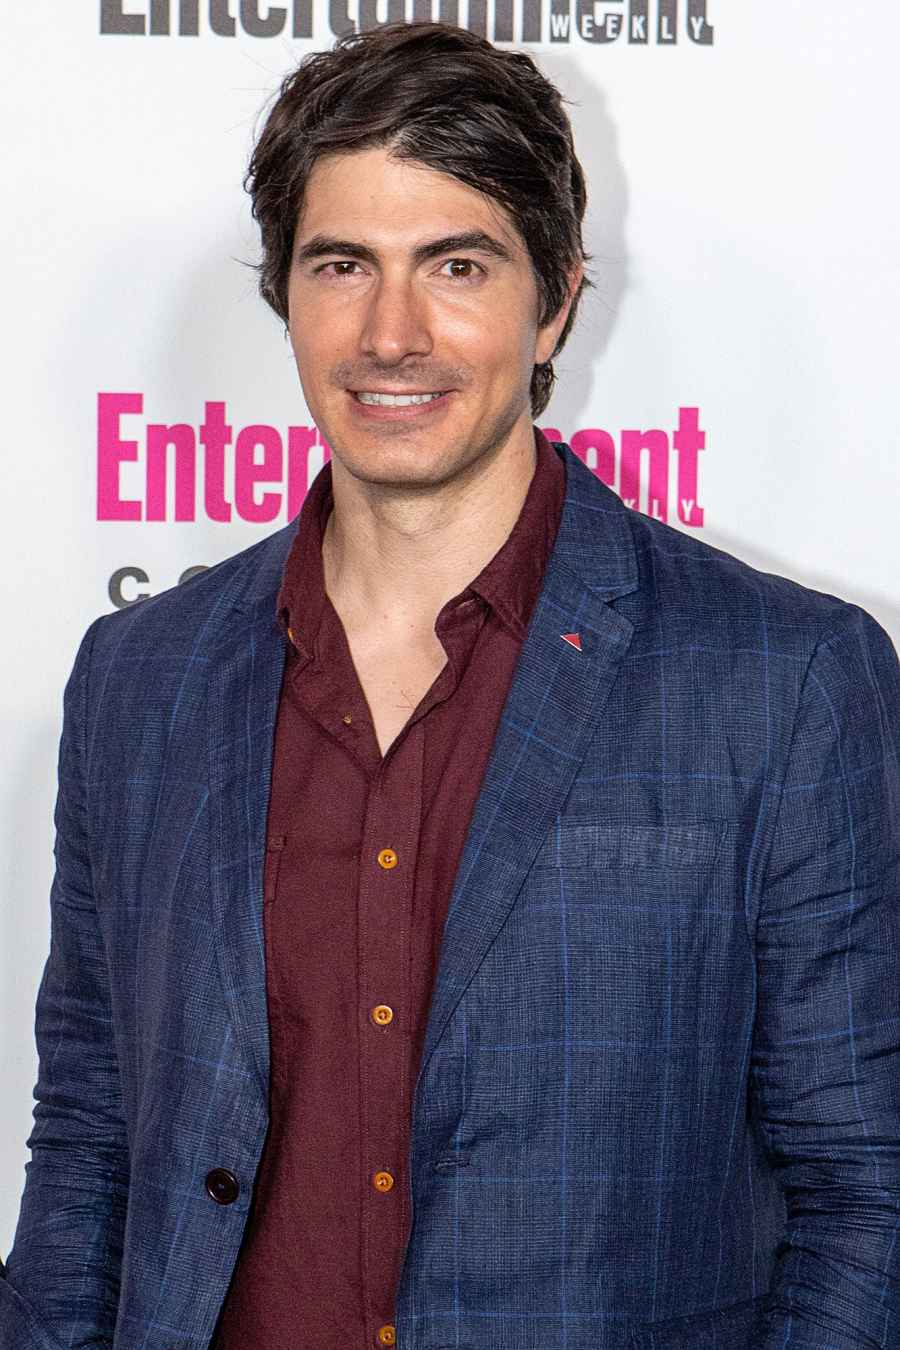 Who Is Hallmark Channel’s Brandon Routh? 6 Things to Know About ‘The Nine Lives of Christmas’ Hunk